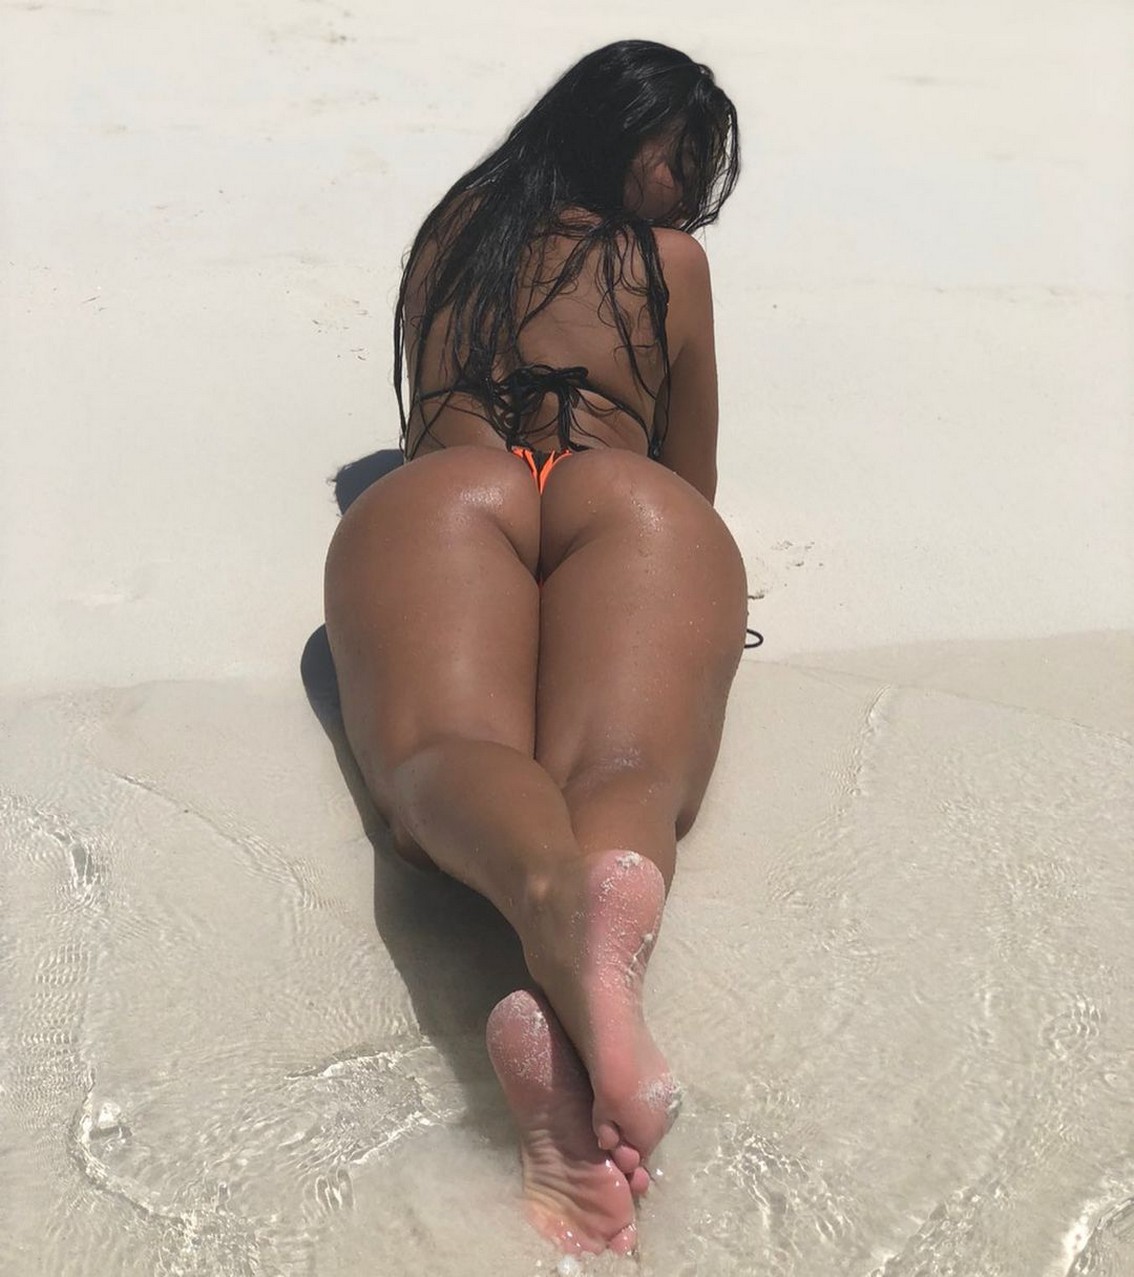 Check out Rachel Bush’s nude and sexy photos from social media (2020-2021)....